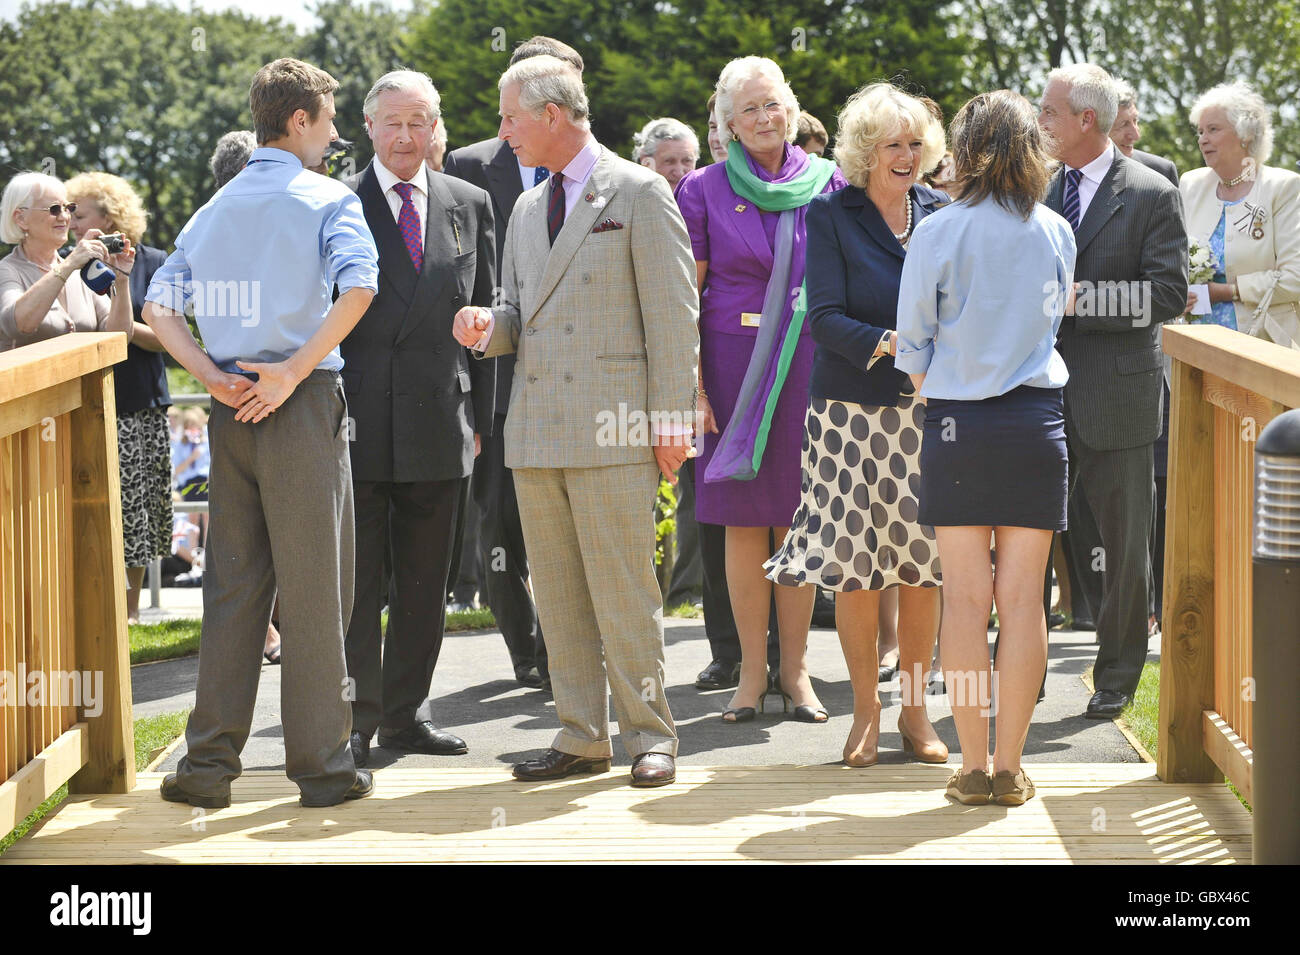 The Prince of Wales and the Duchess of Cornwall chat to pupils before entering into the Integrated Health Centre during their visit to Penair School, Truro, Cornwall. Stock Photo